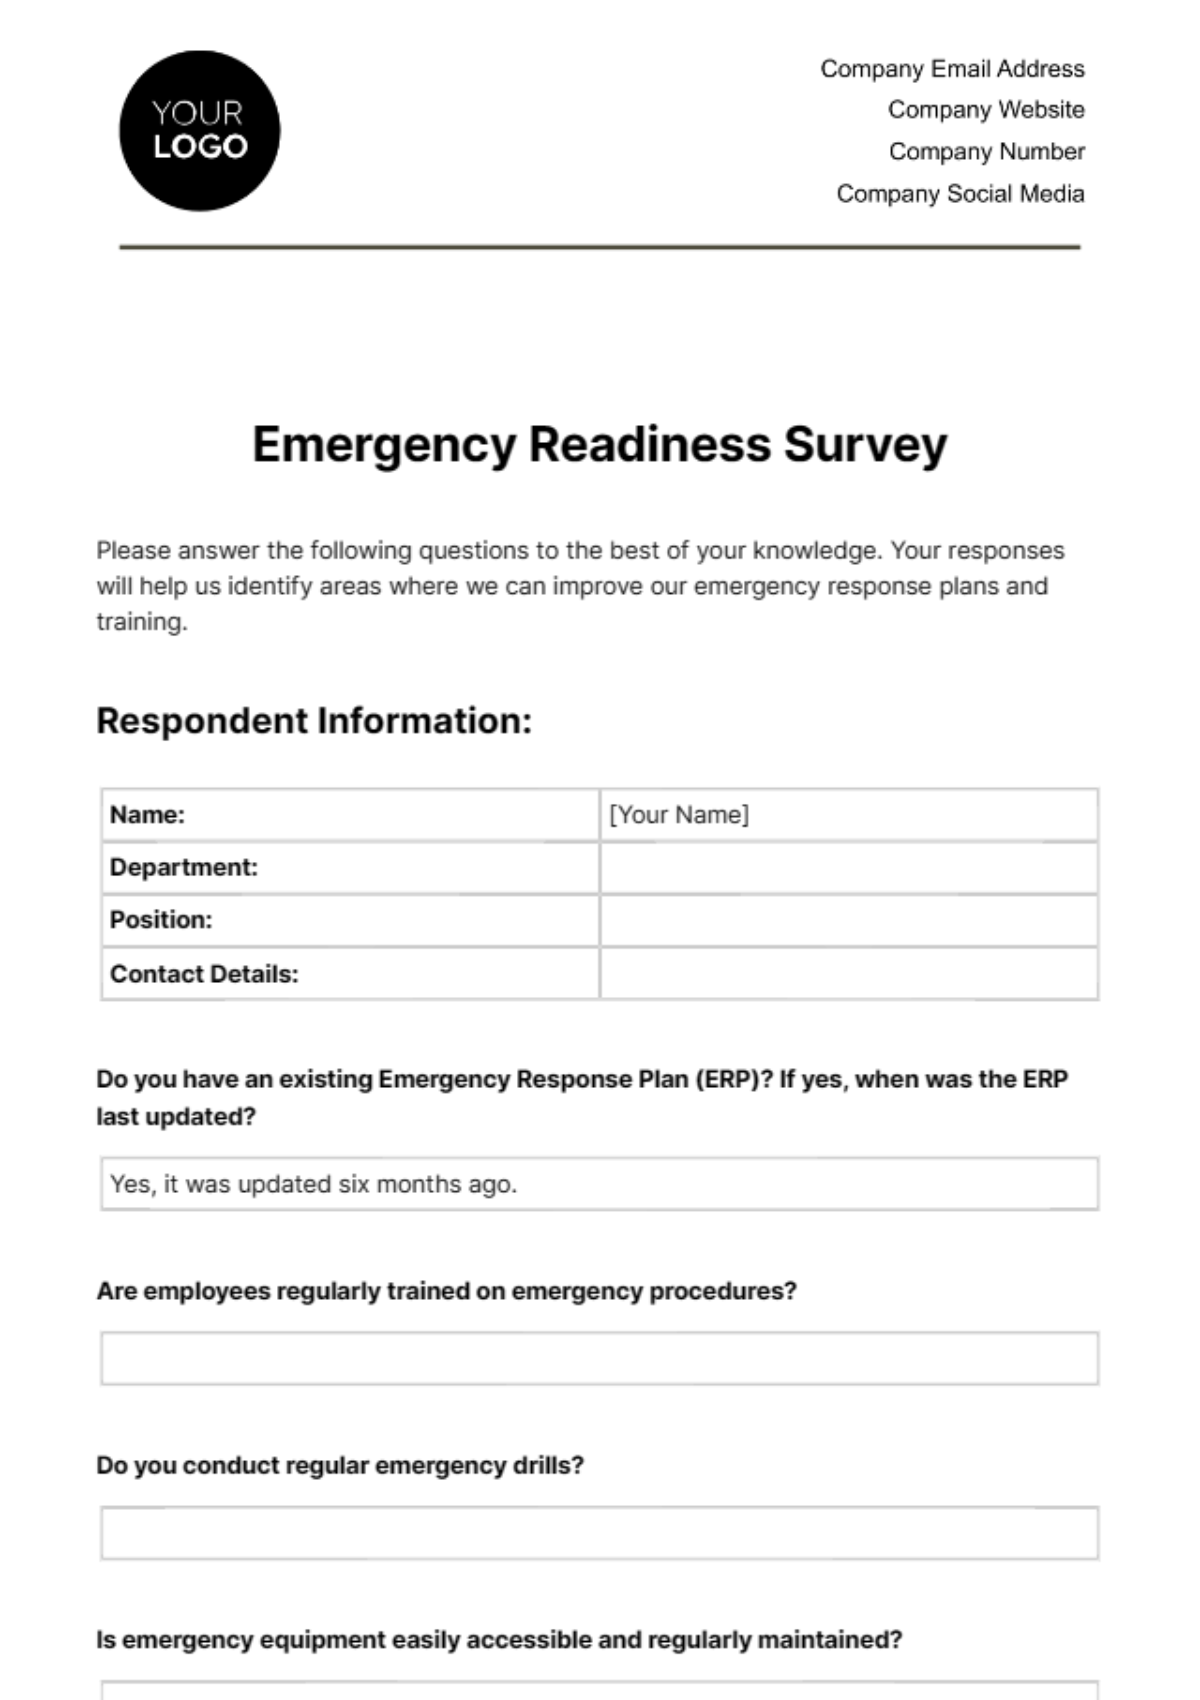 Emergency Readiness Survey Template